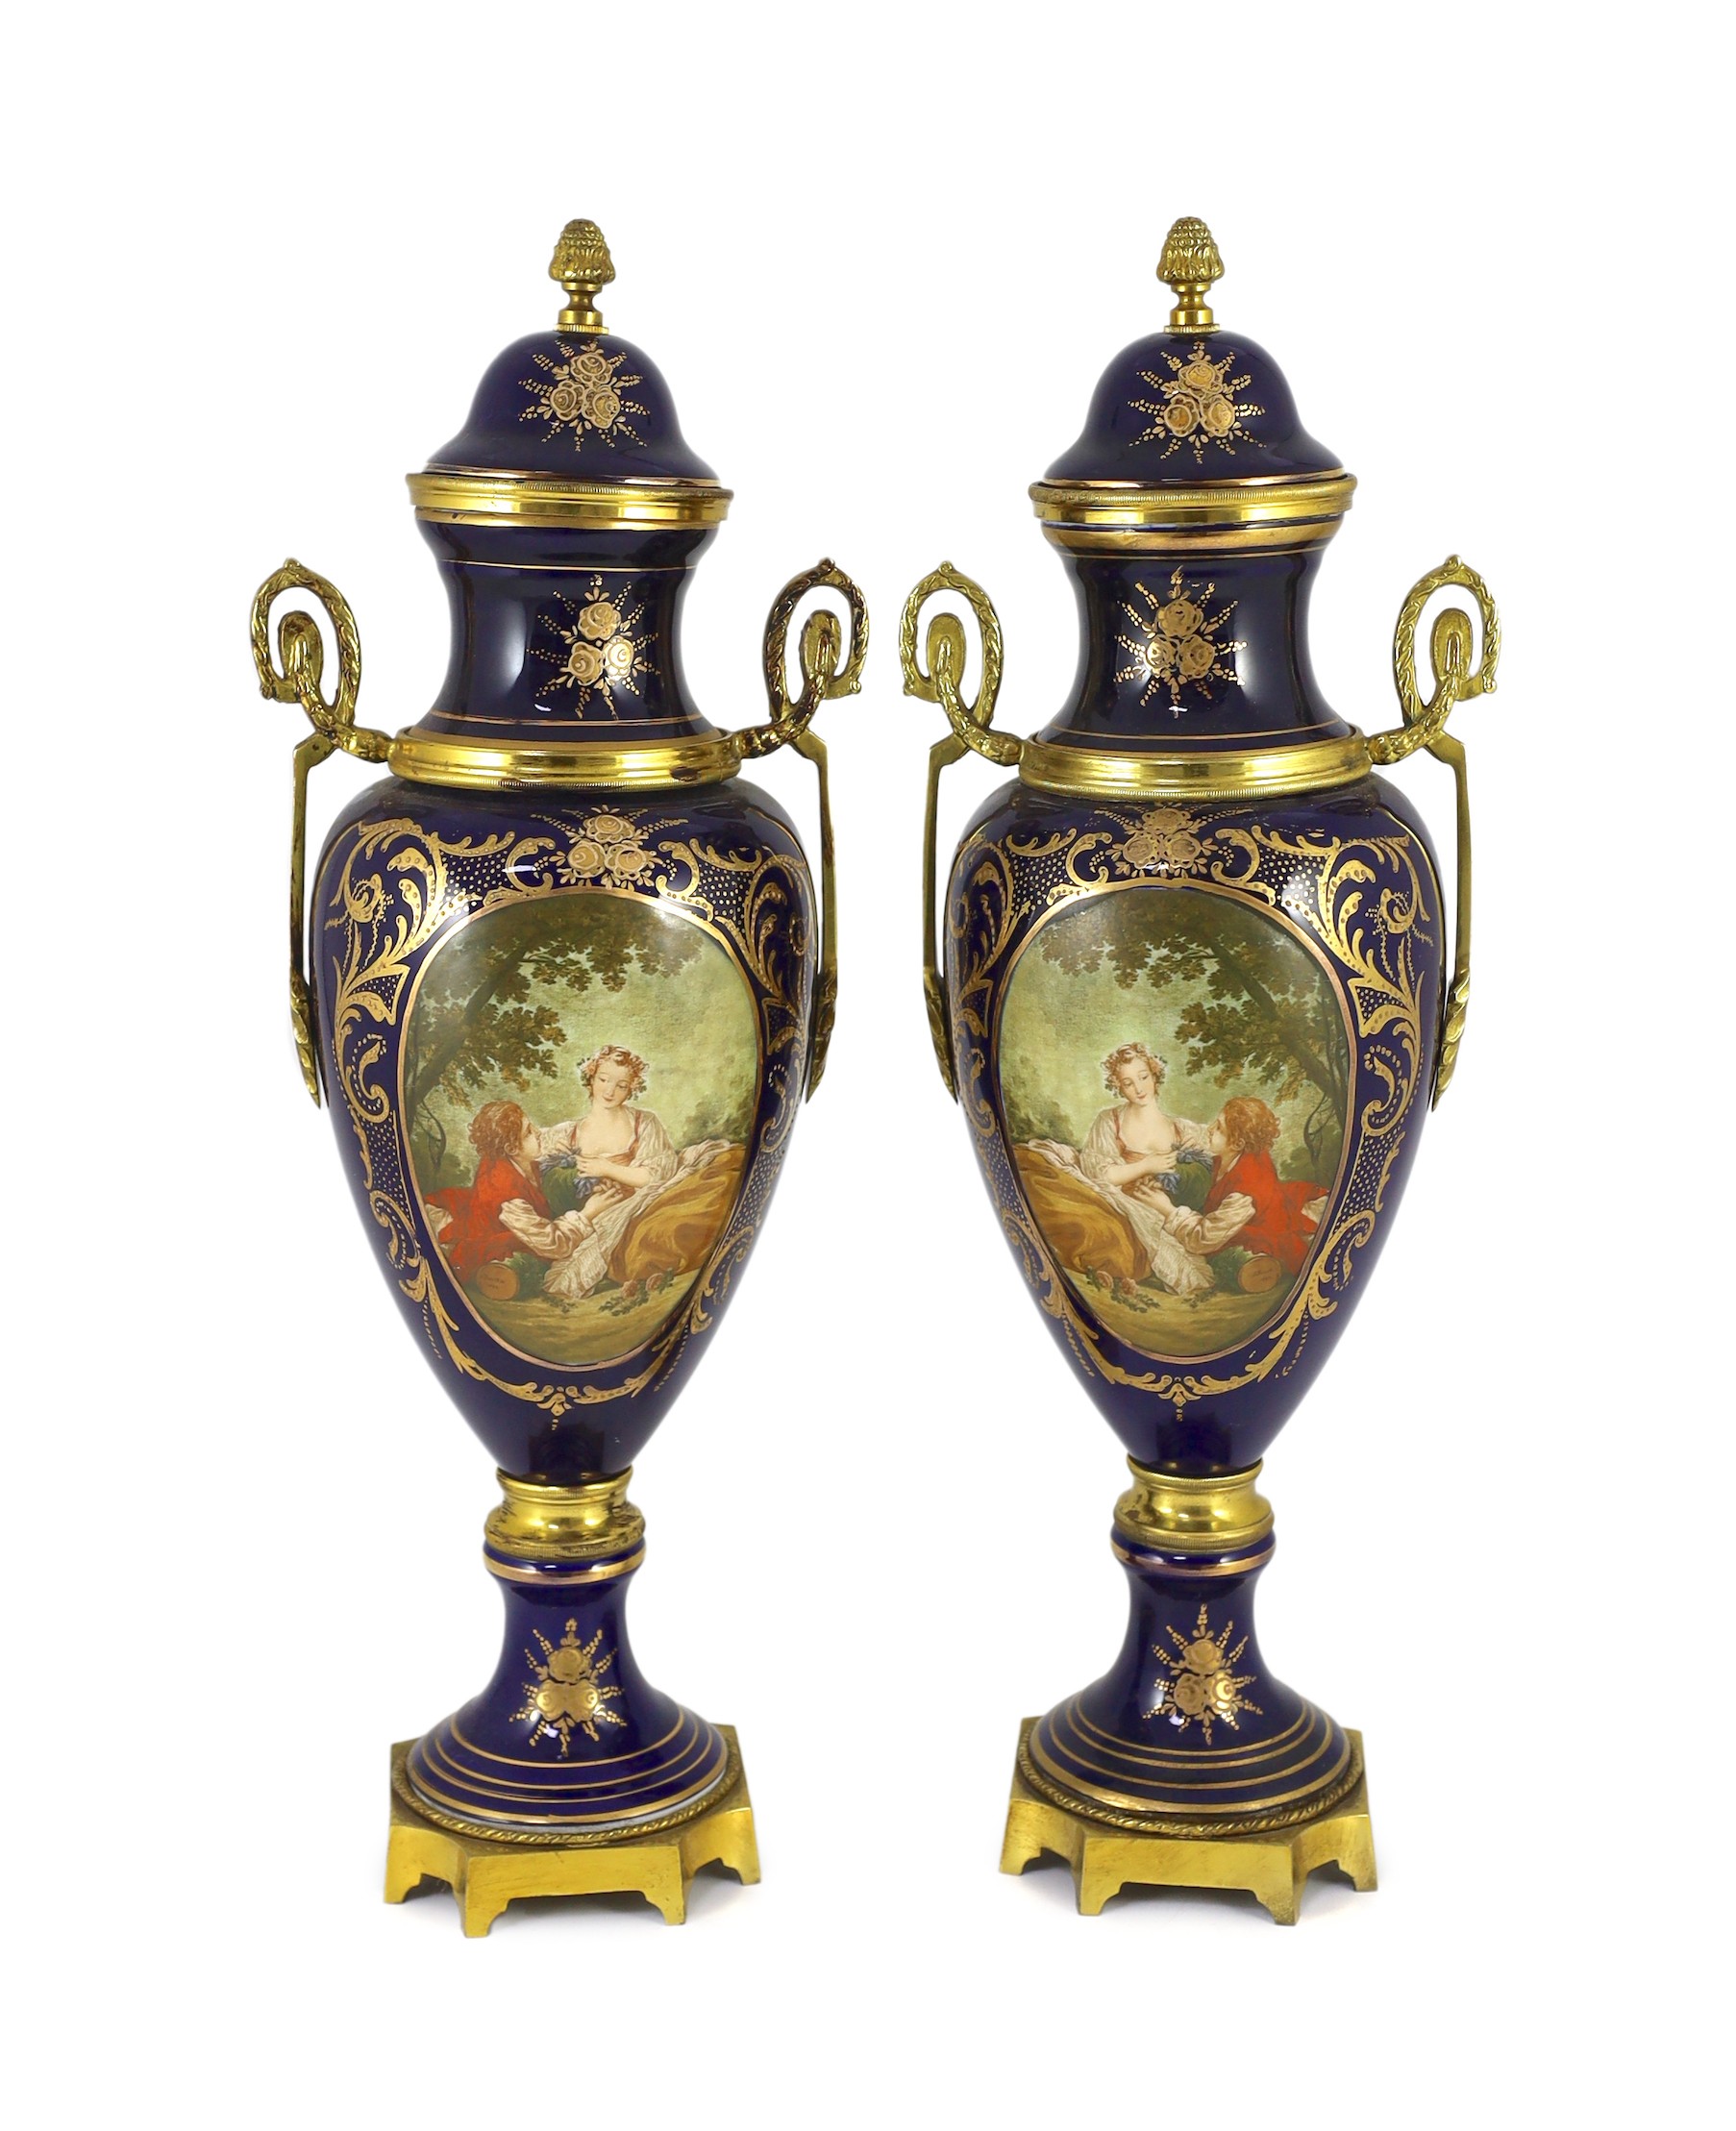 A pair of Sevres style porcelain and ormolu mounted vases, late 20th century, 49 cm high                                                                                                                                    